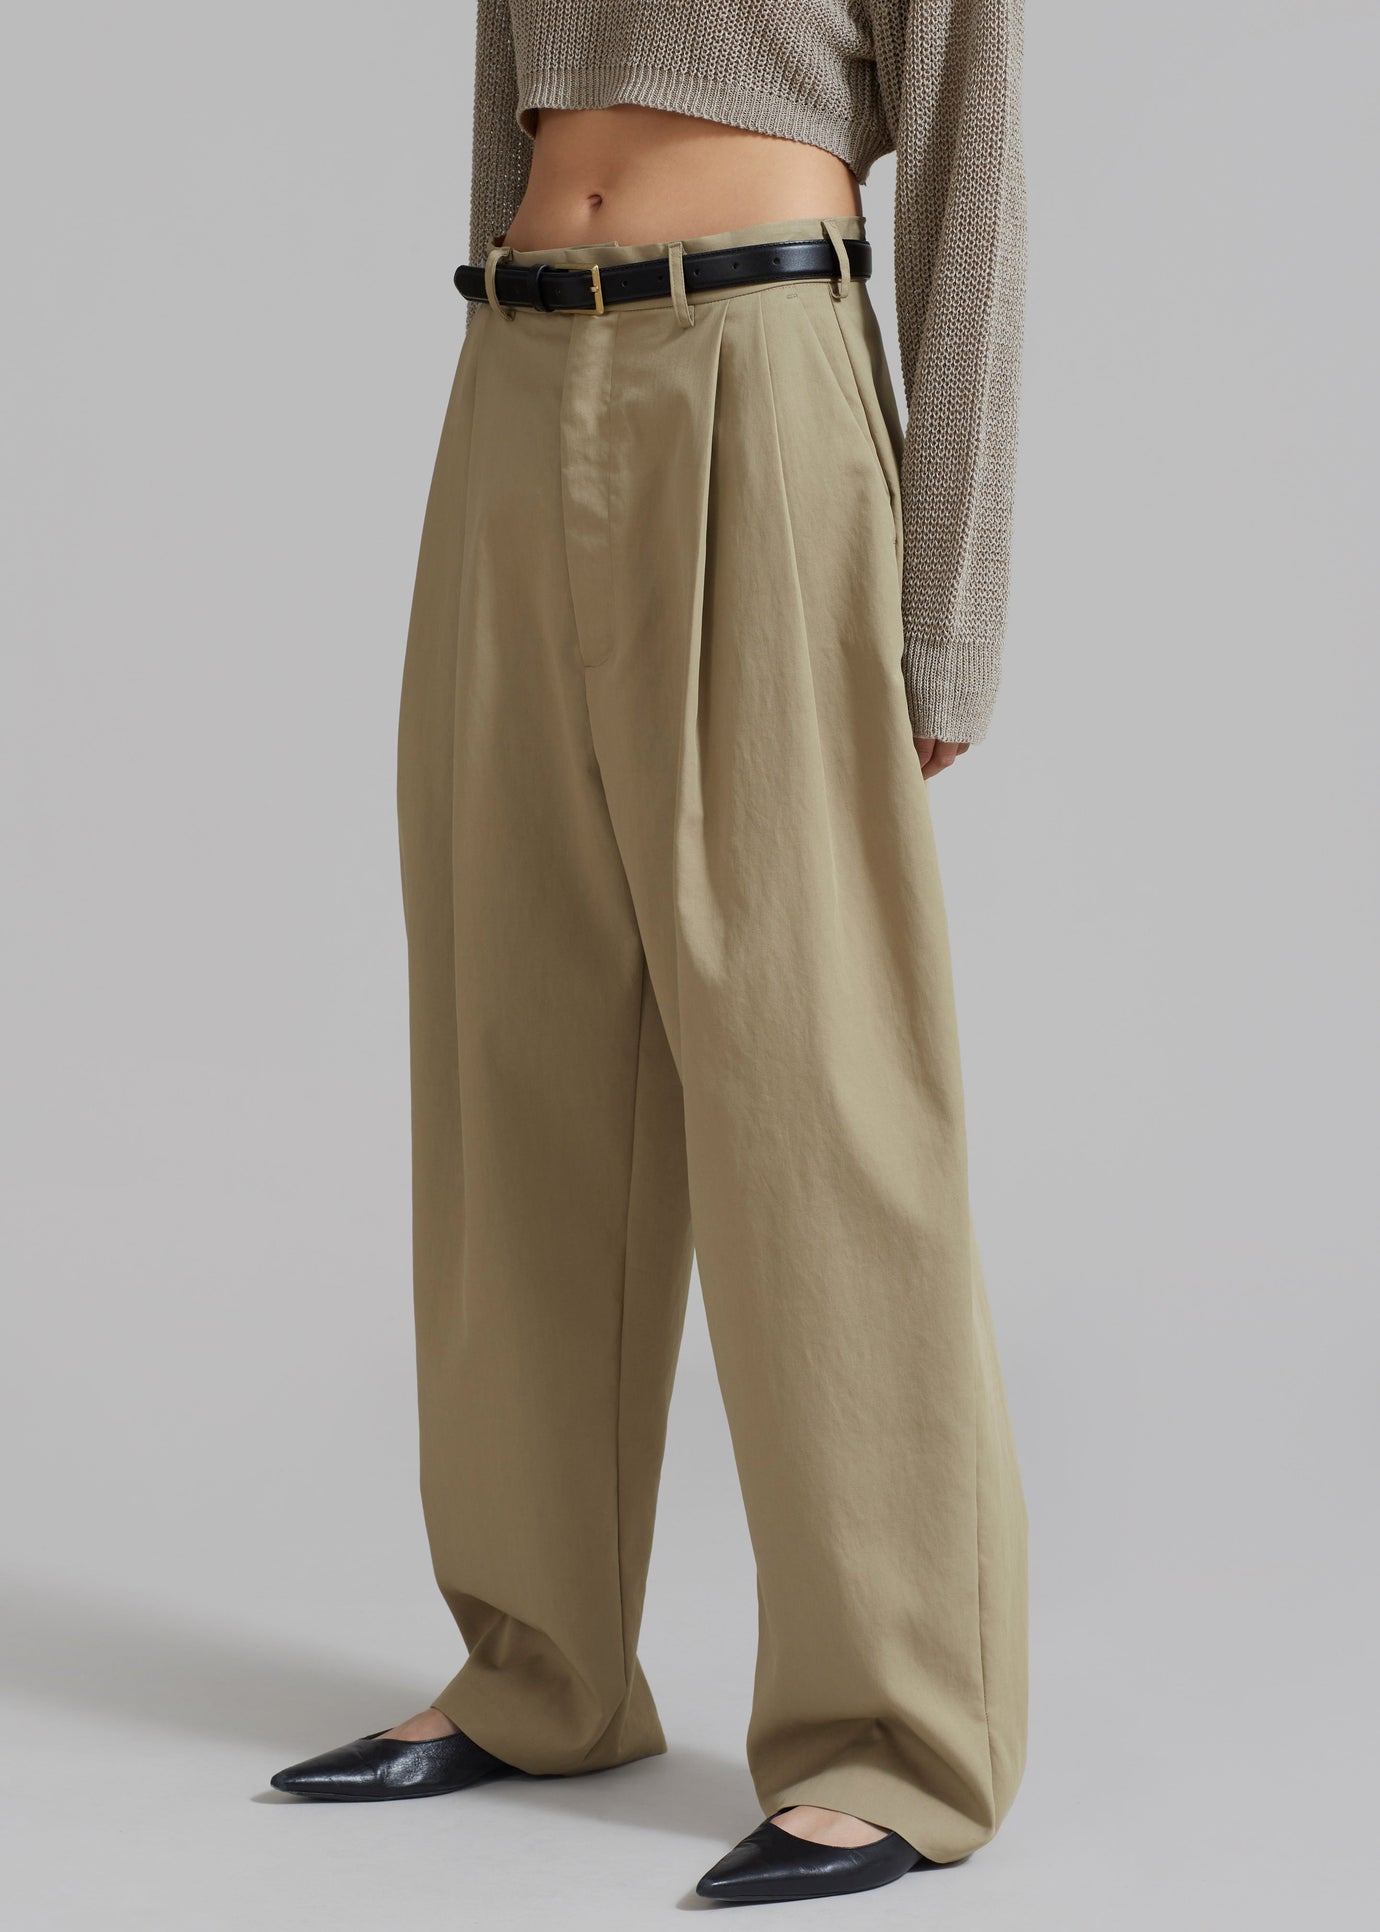 Opp Suit Pants - Taupe